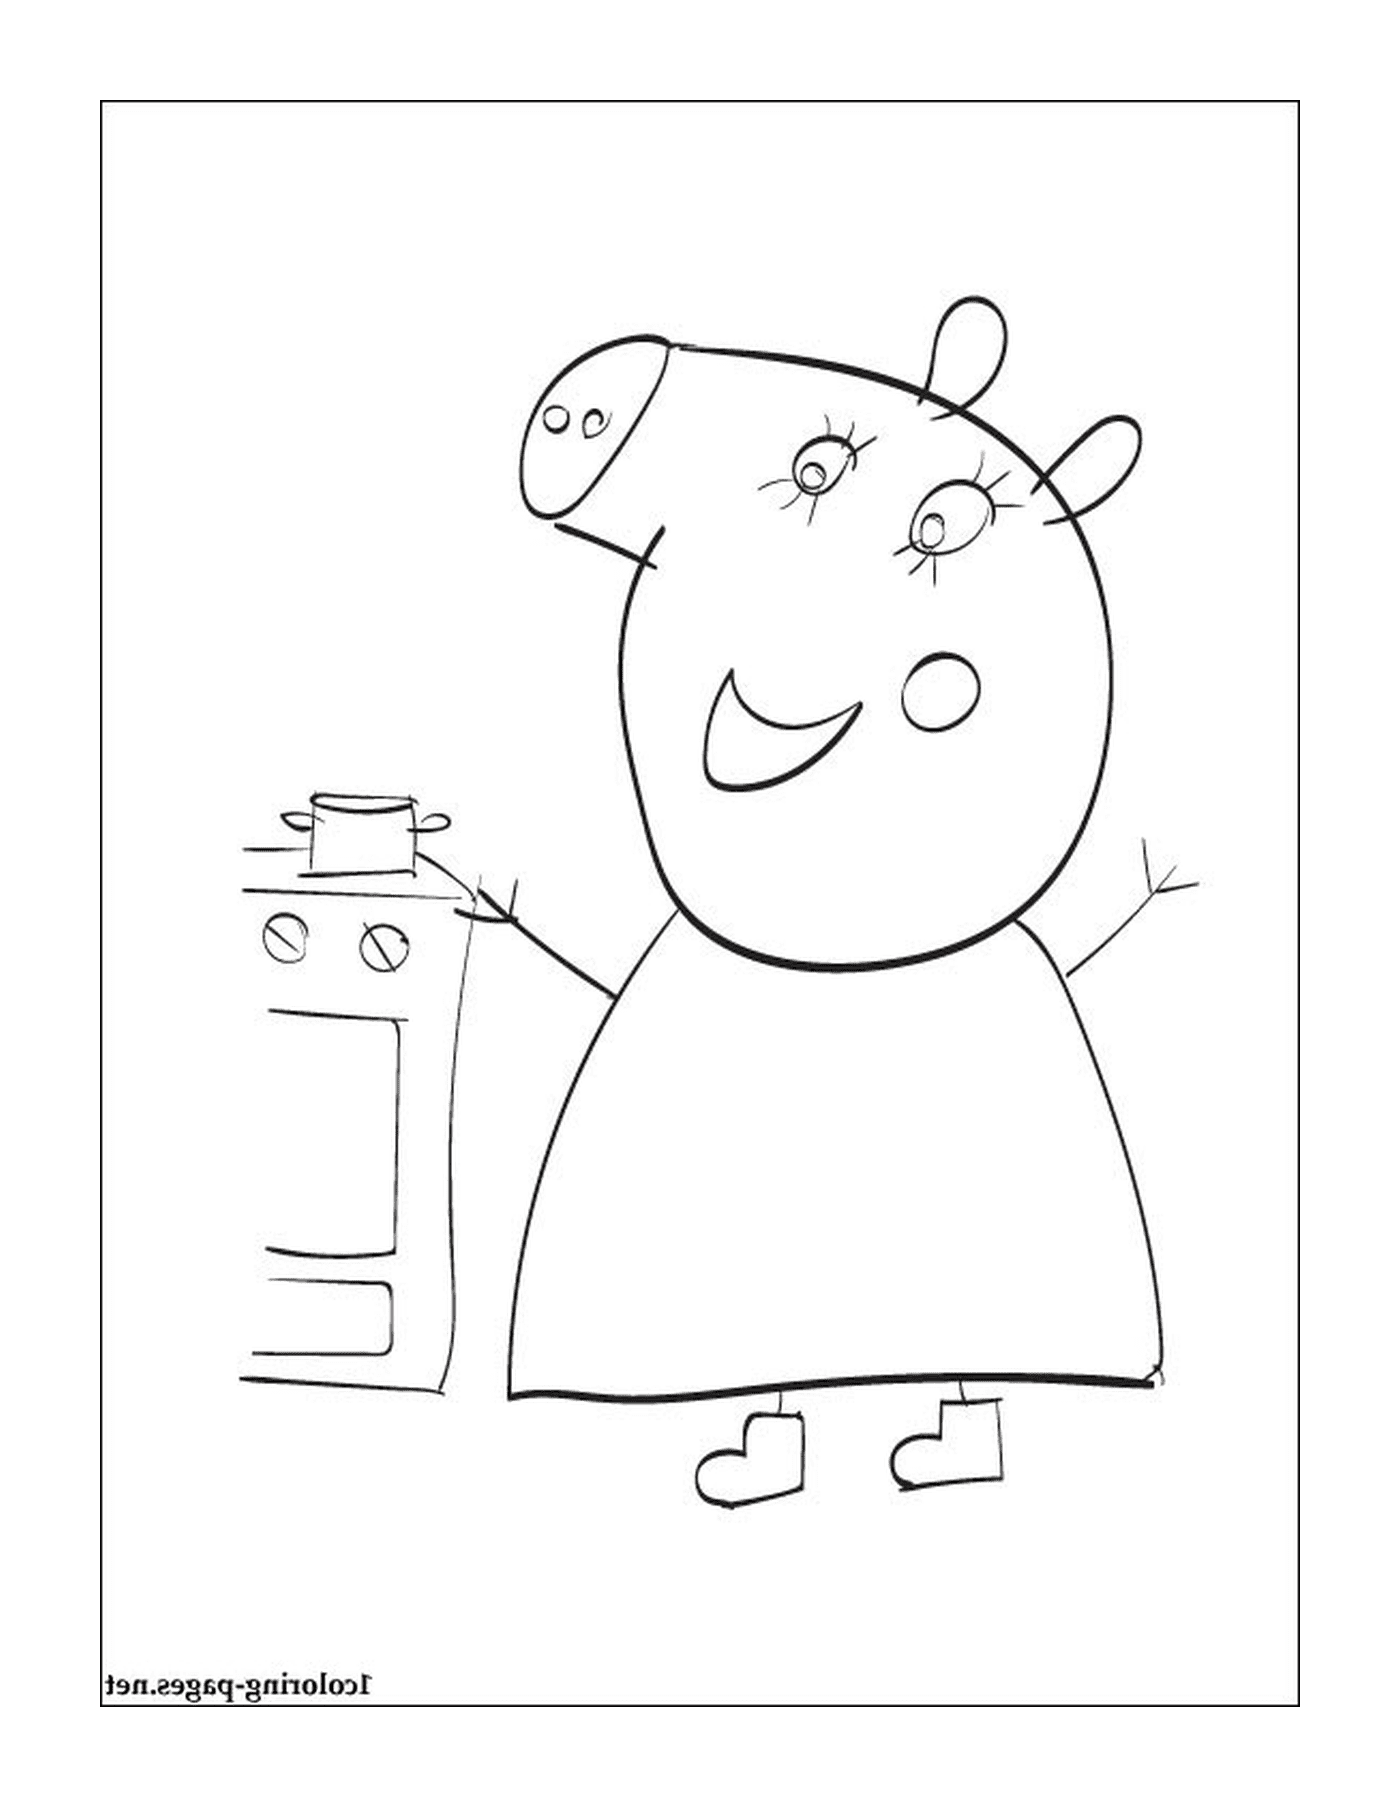  Peppa Pig holding a stove 